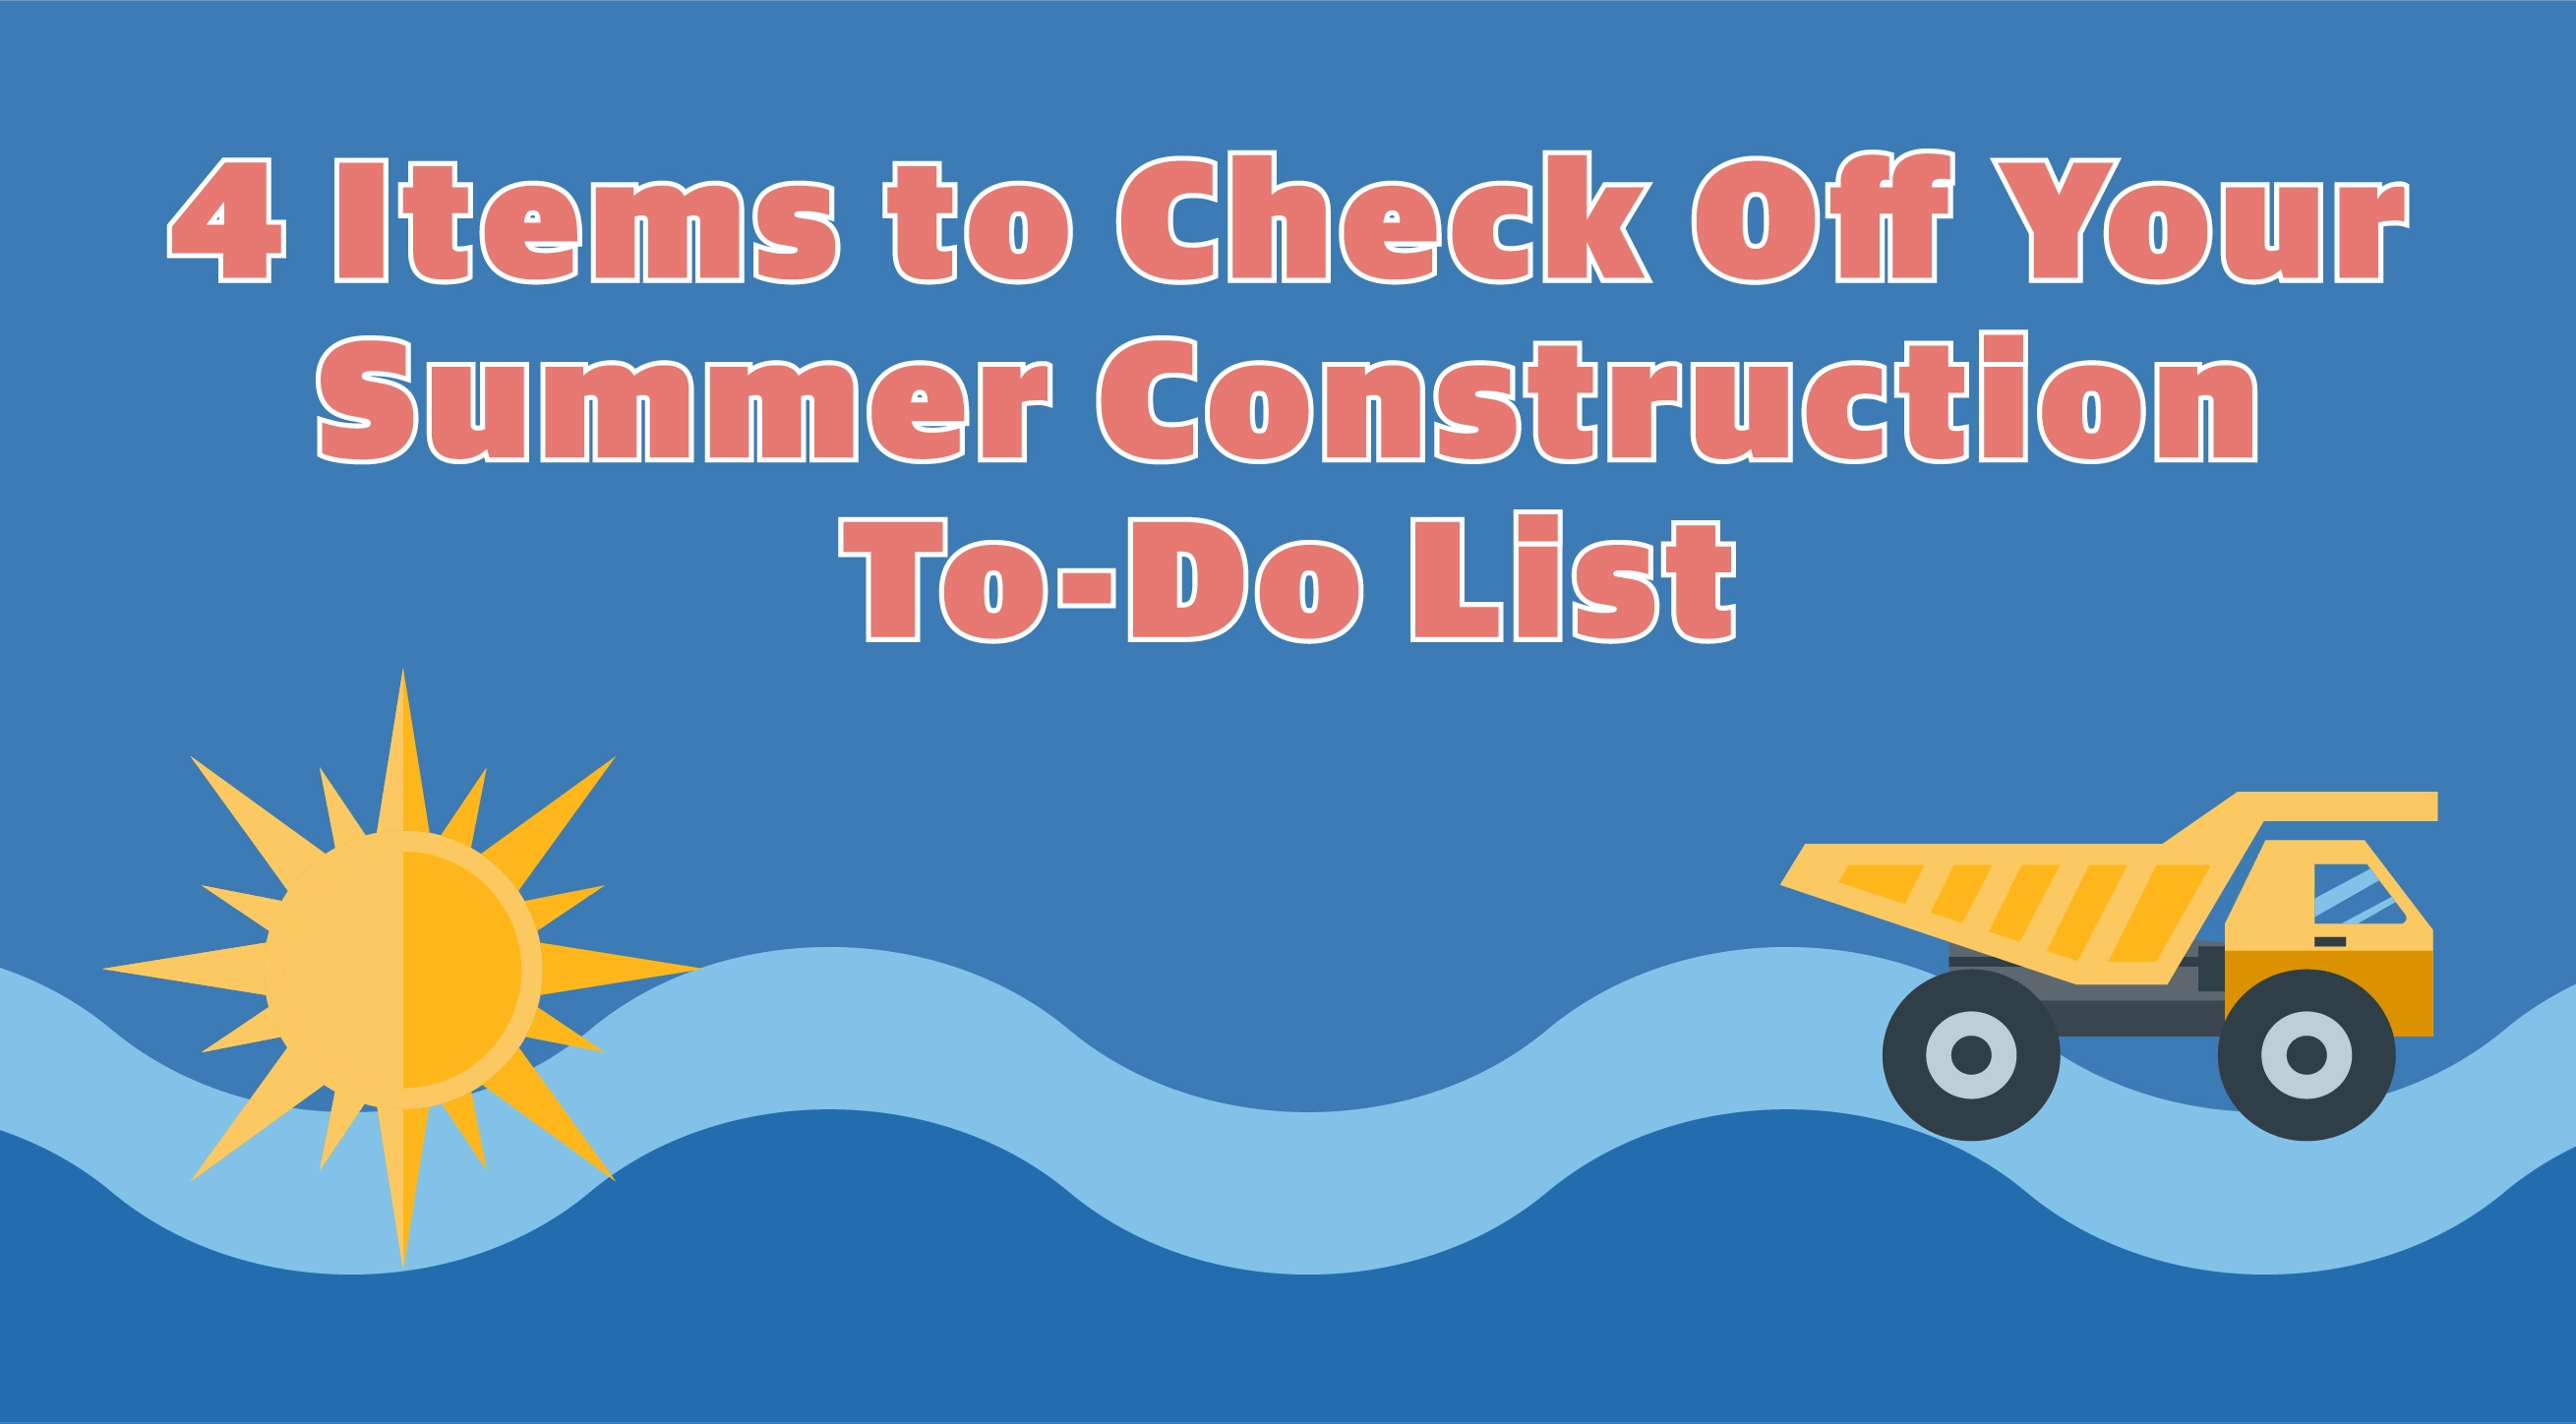 4 Important Items to Check Off Your Summer Construction To-Do List 1